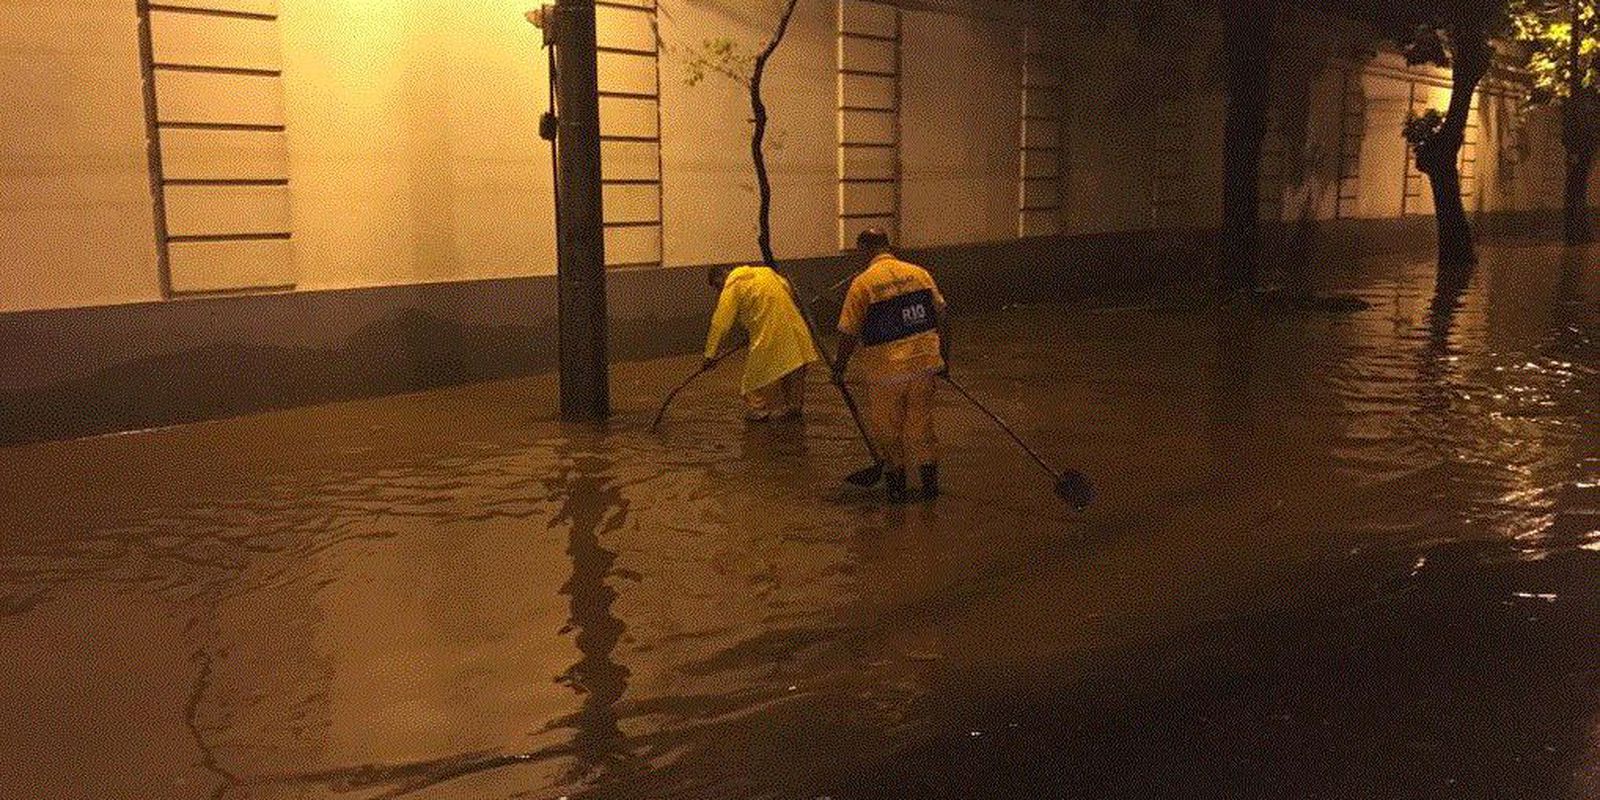 Rio de Janeiro remains in a state of alert because of the rains